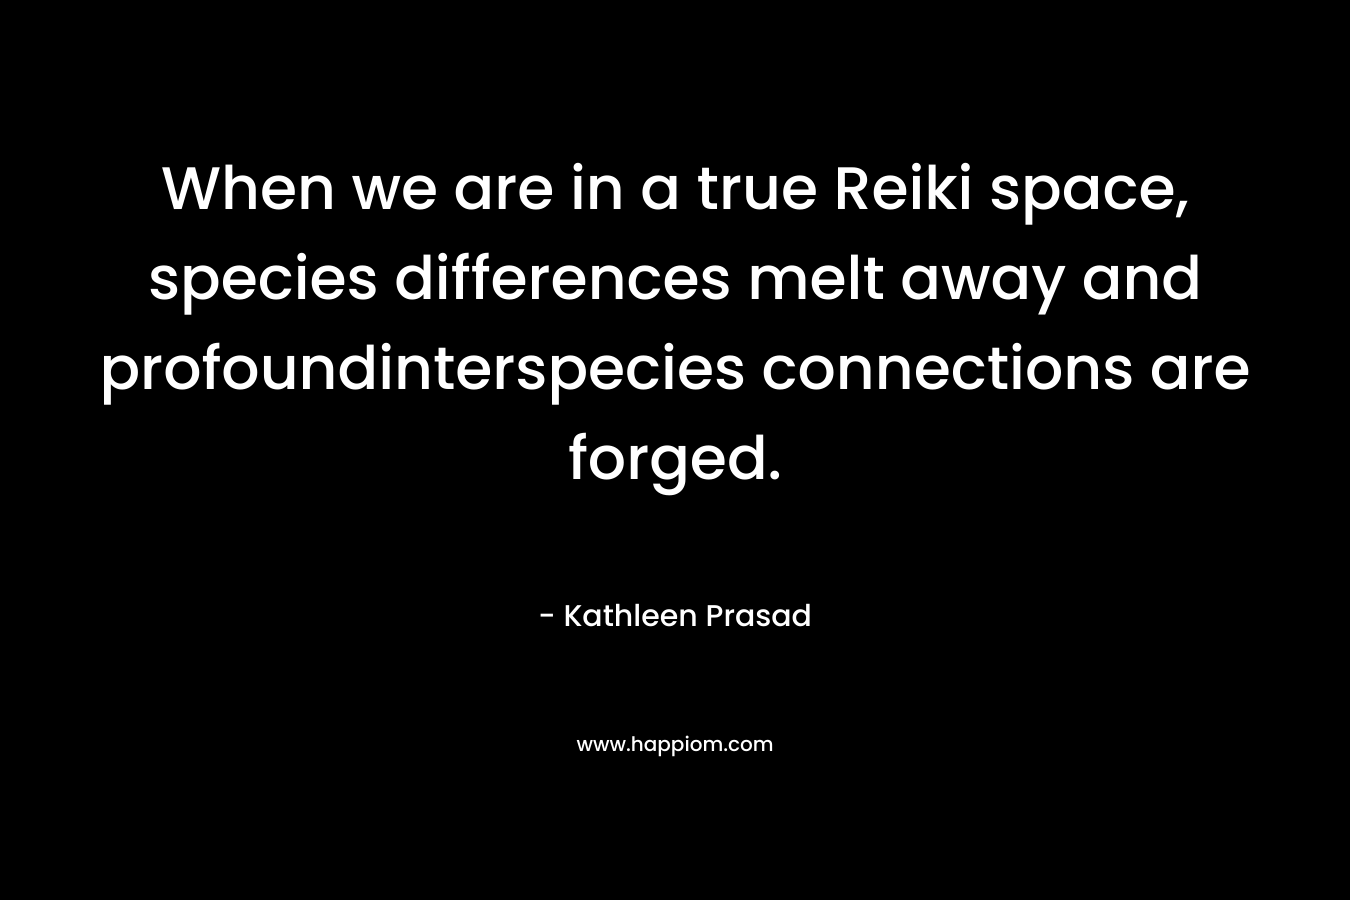 When we are in a true Reiki space, species differences melt away and profoundinterspecies connections are forged.